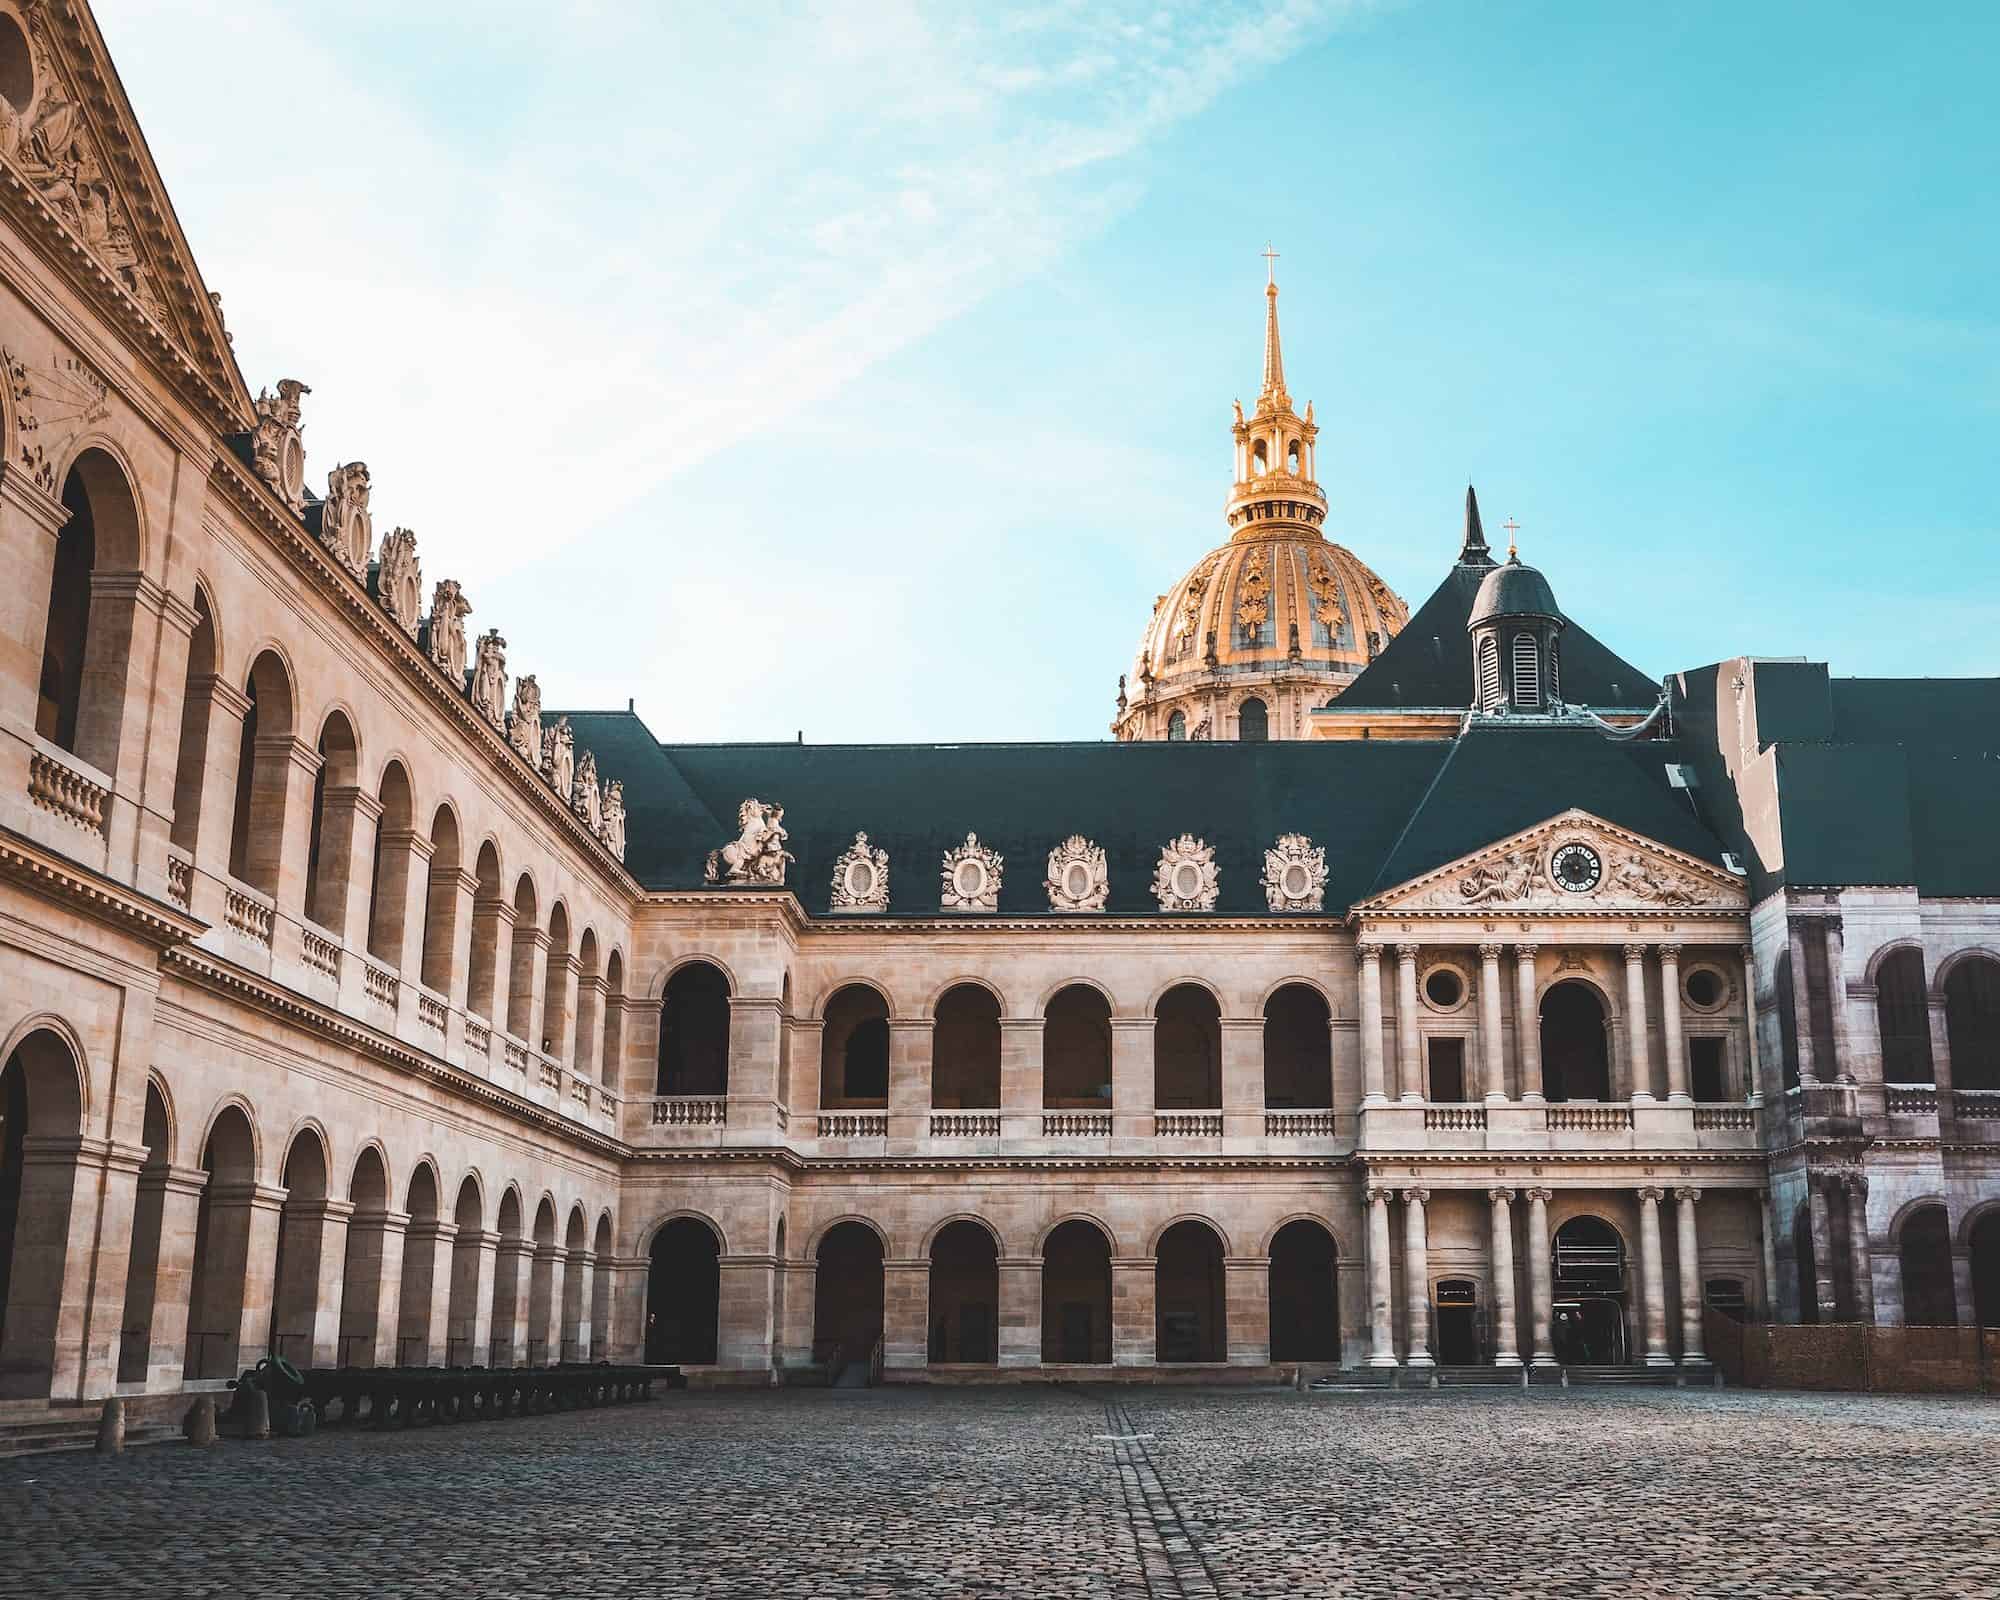 The interior cobblestone courtyard at the Invalides, with the gold dome sticking out the top.